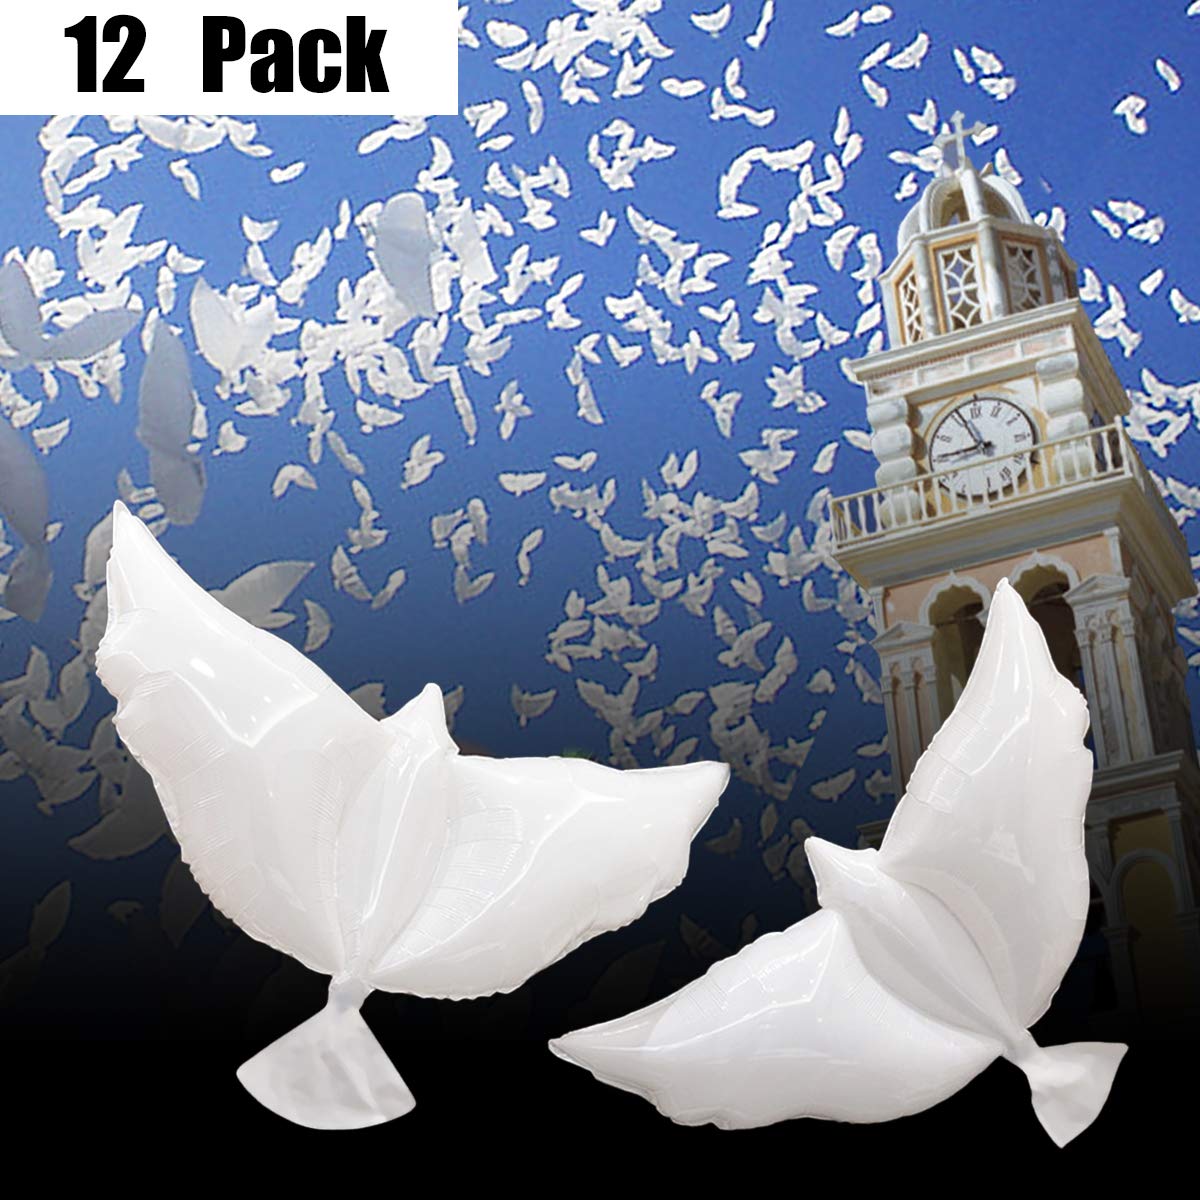 Dove Memorial Balloons for Release - Biodegradable Funeral Remembrance Angel Balloons to Release in Sky Memorial Decorations for Celebration of Life Death RIP Rest in Peace Loss of Loved One Happy Heavenly Birthday Party Favors - White 12 Pack